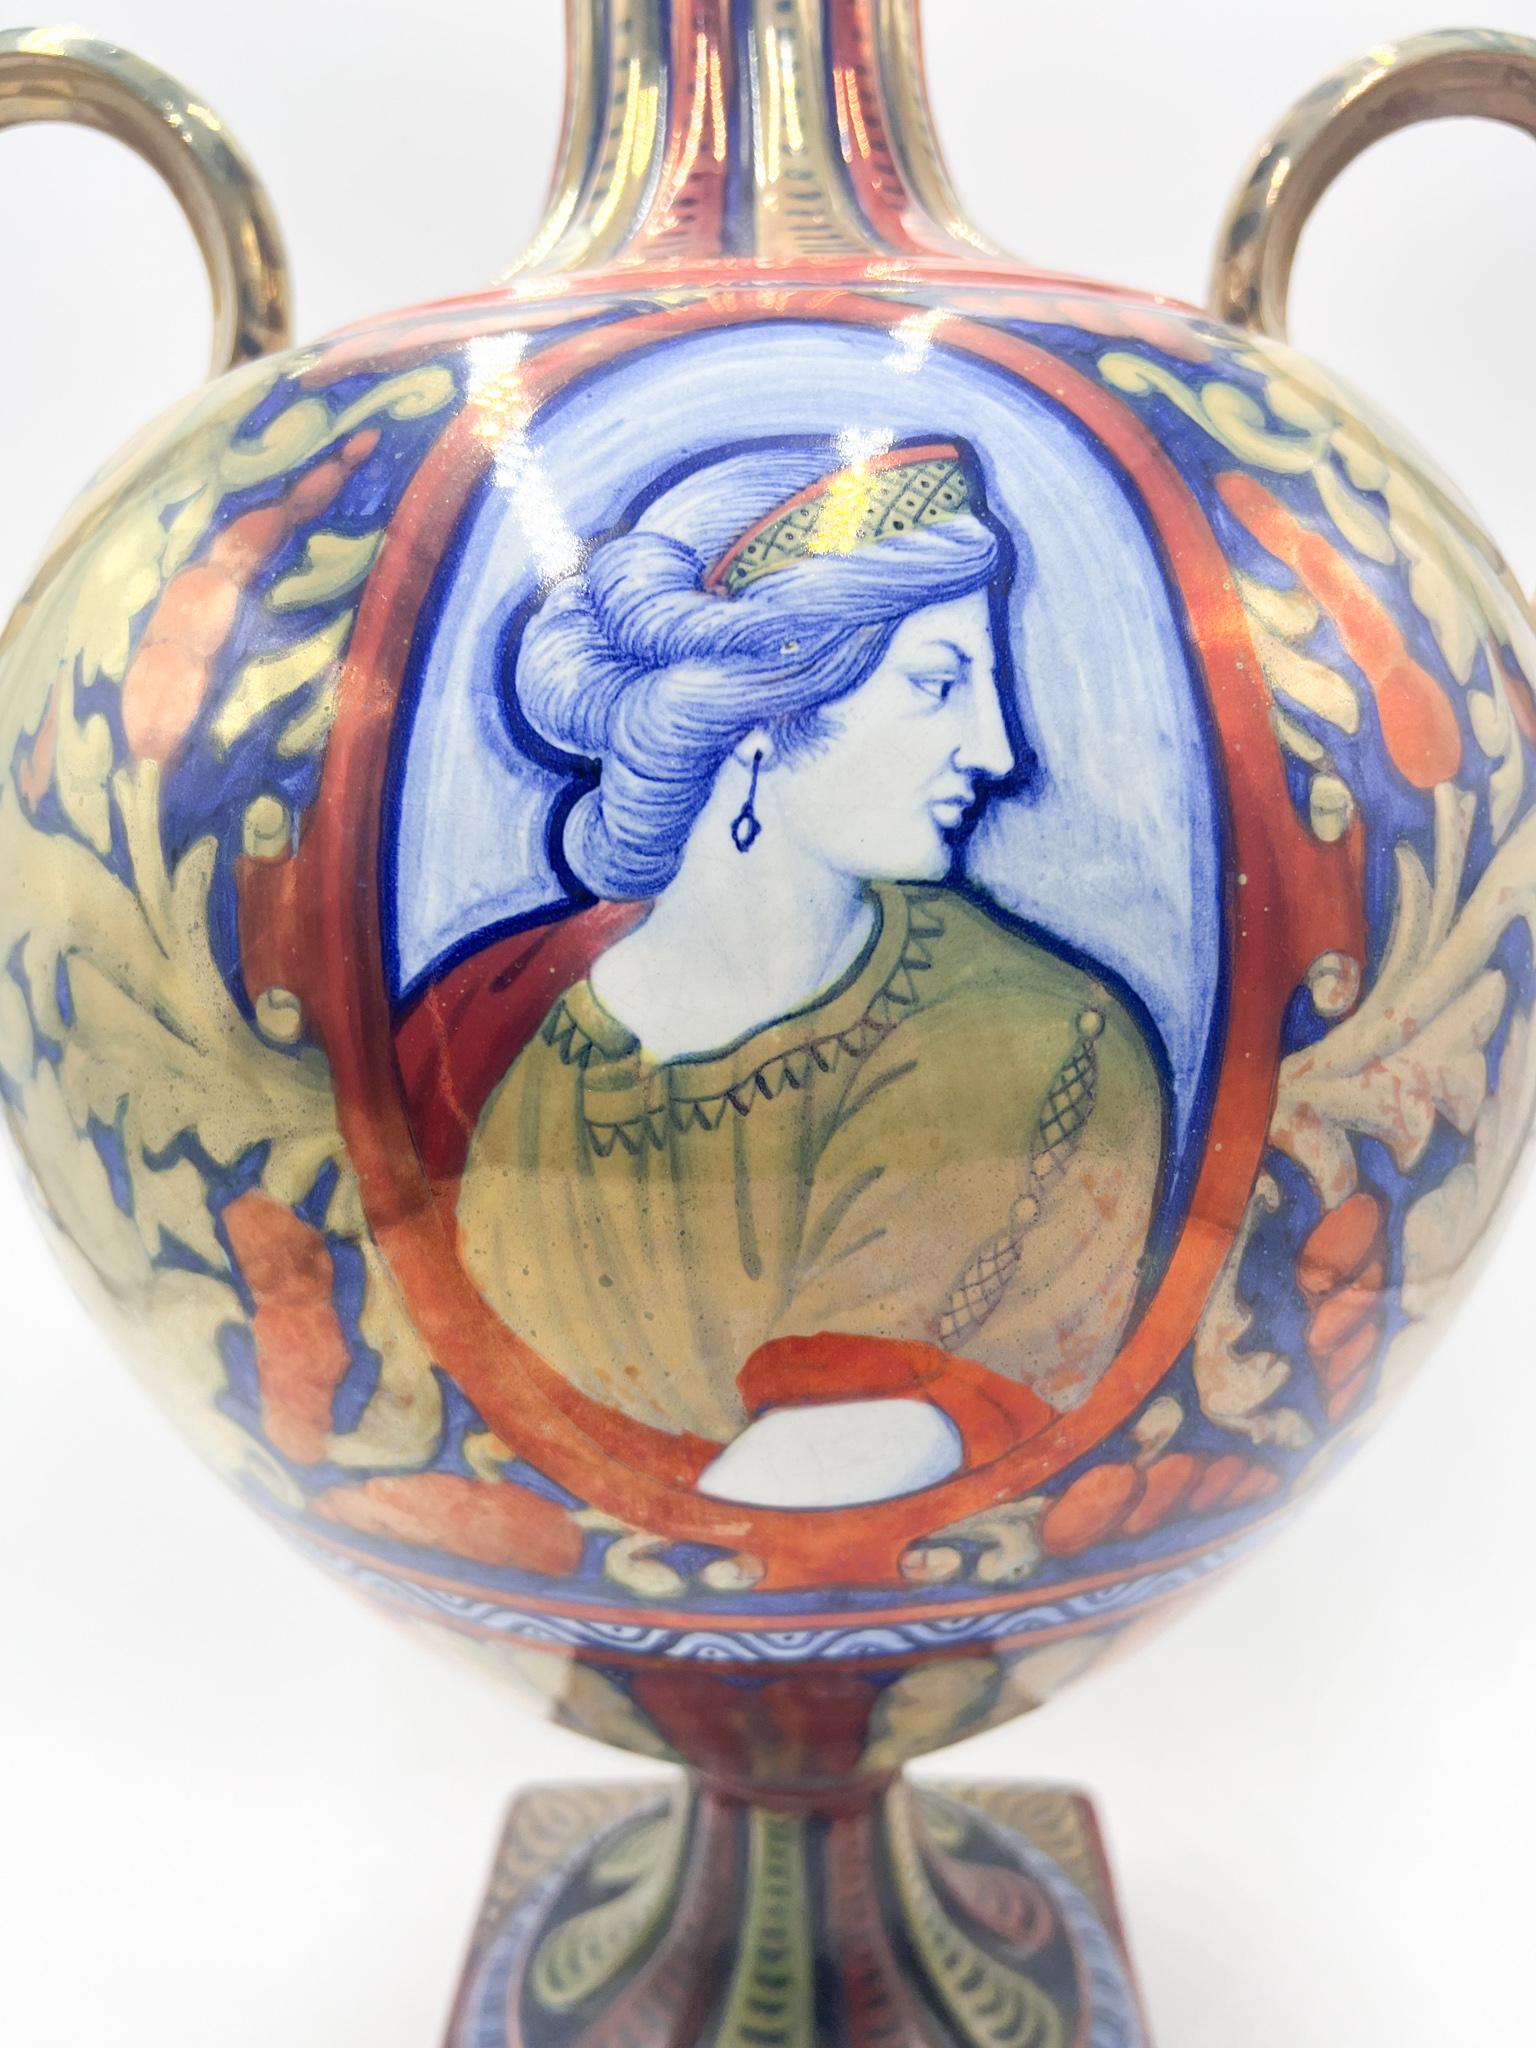 Hand painted ceramic vase, made by Gualdo Tadino in the early 1900s

Ø 32 cm Ø 26 cm h 50 cm